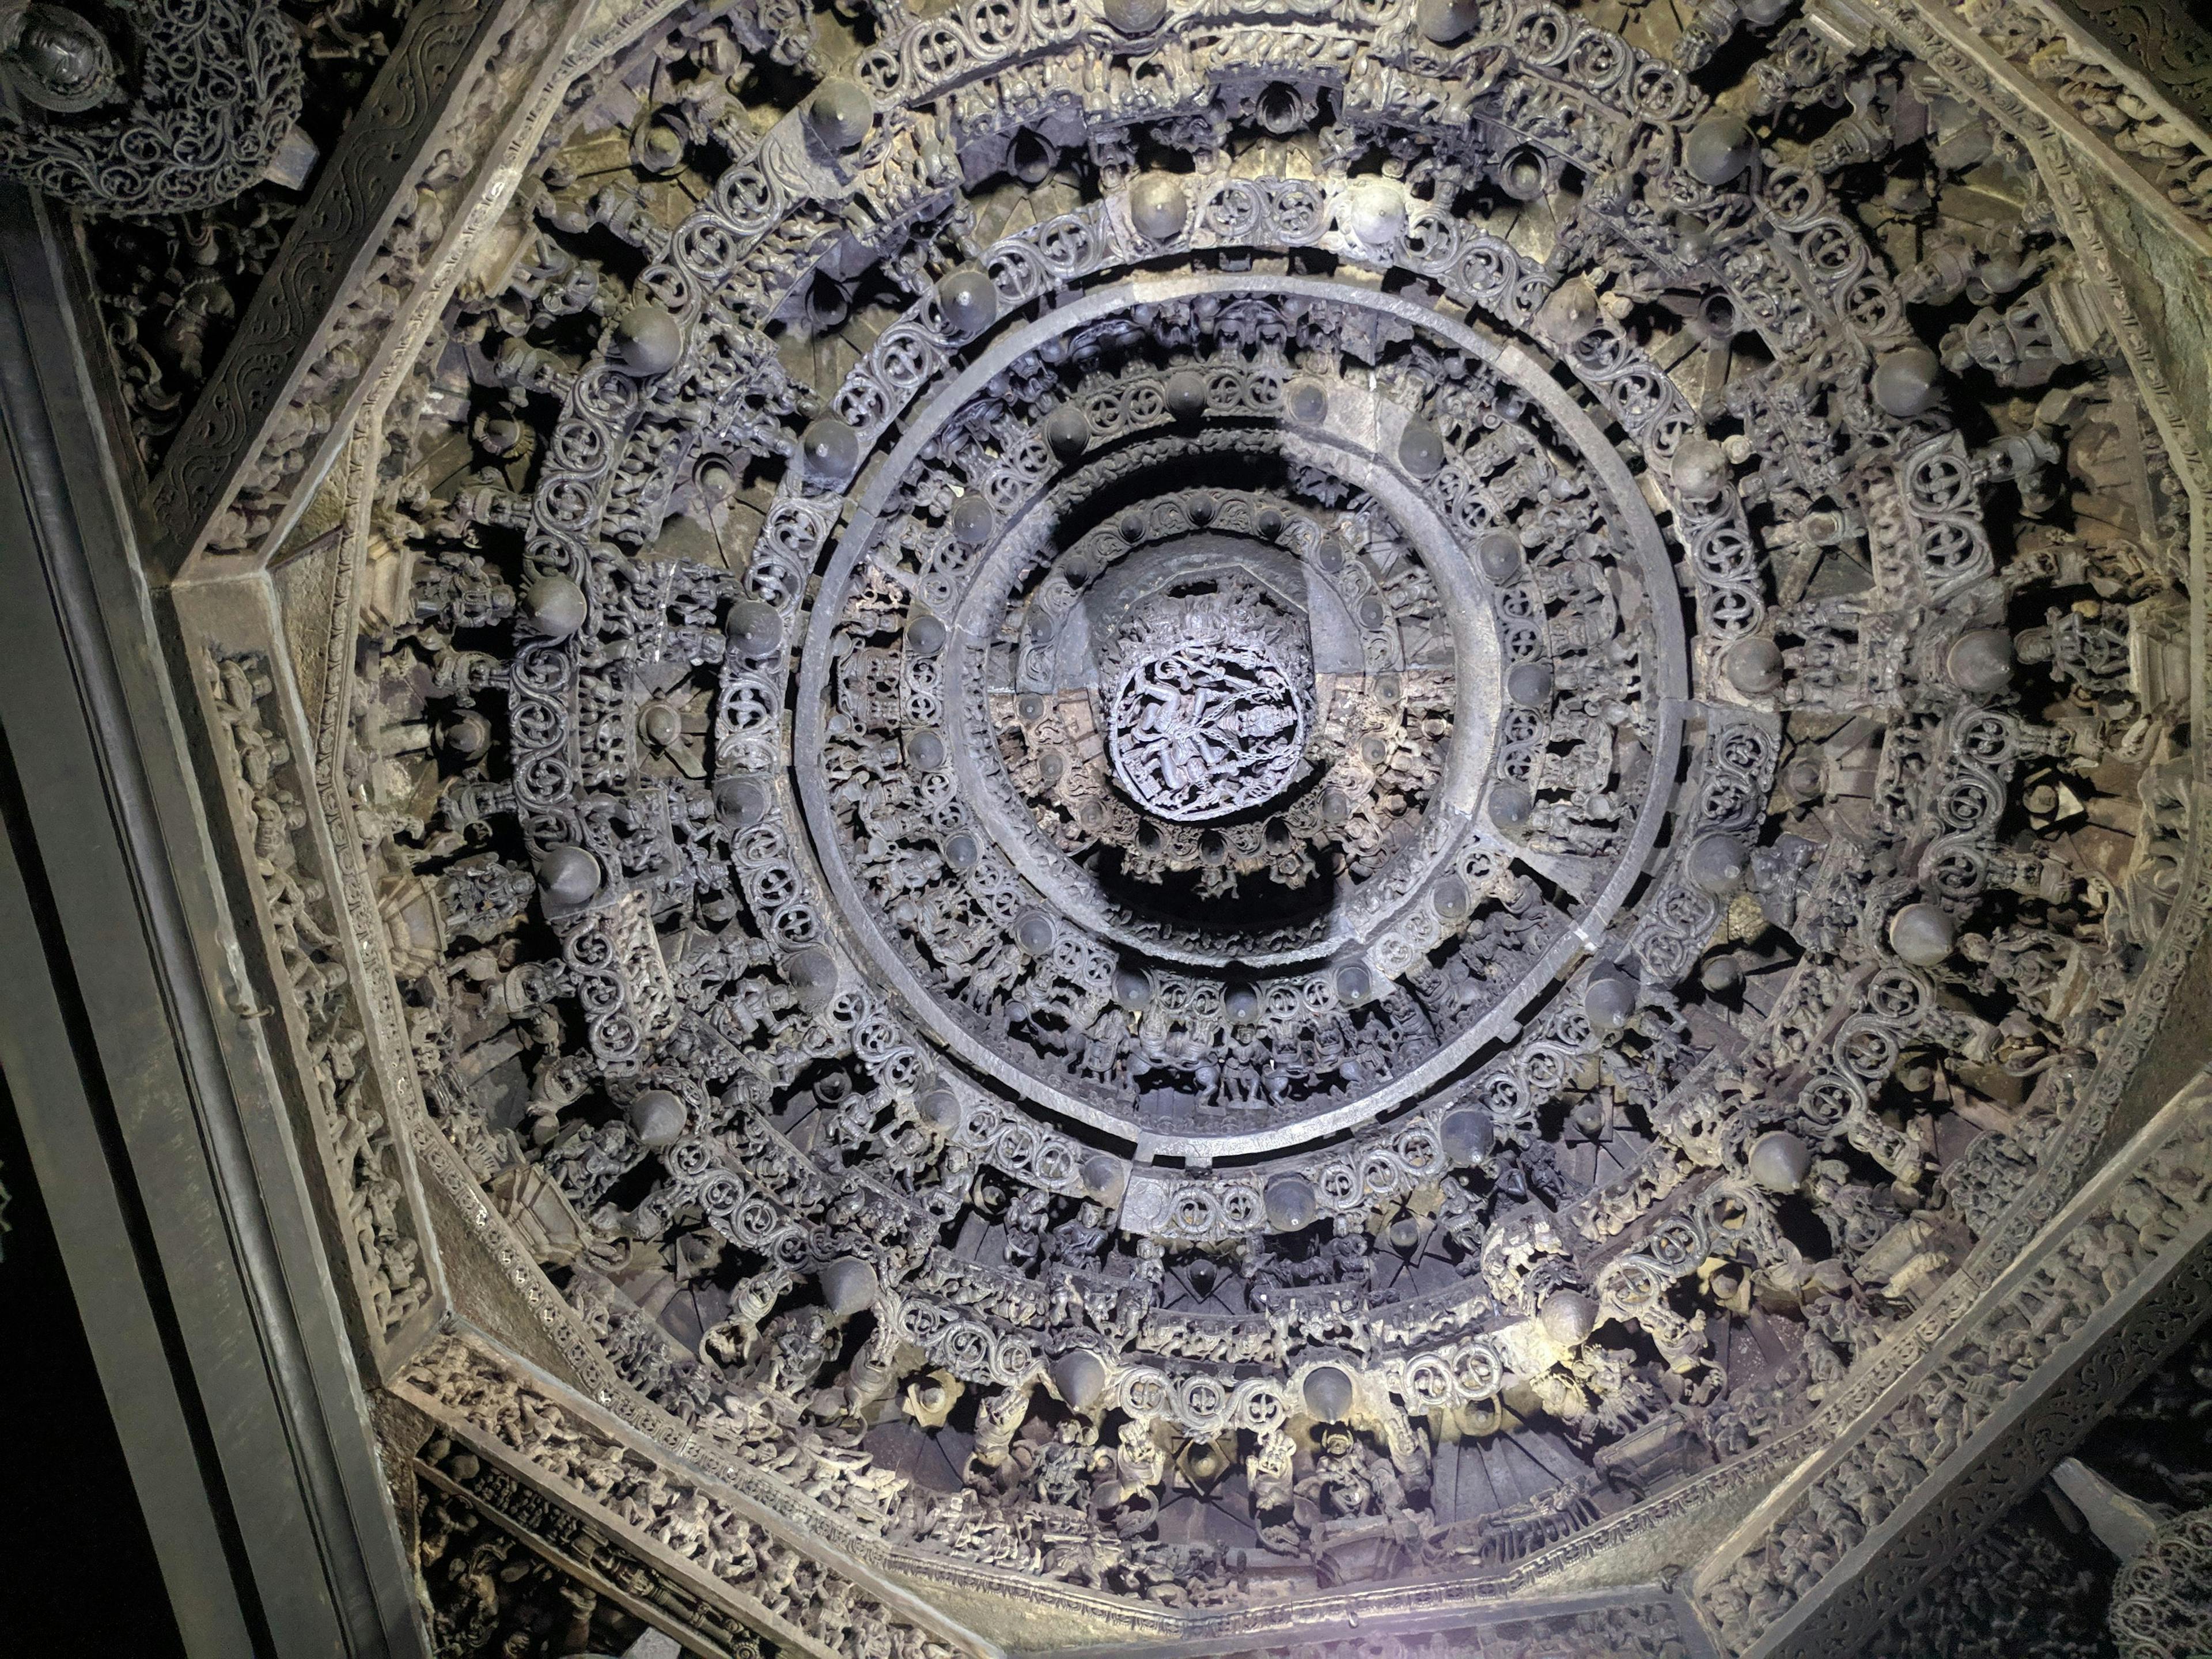 The ceiling of the temple